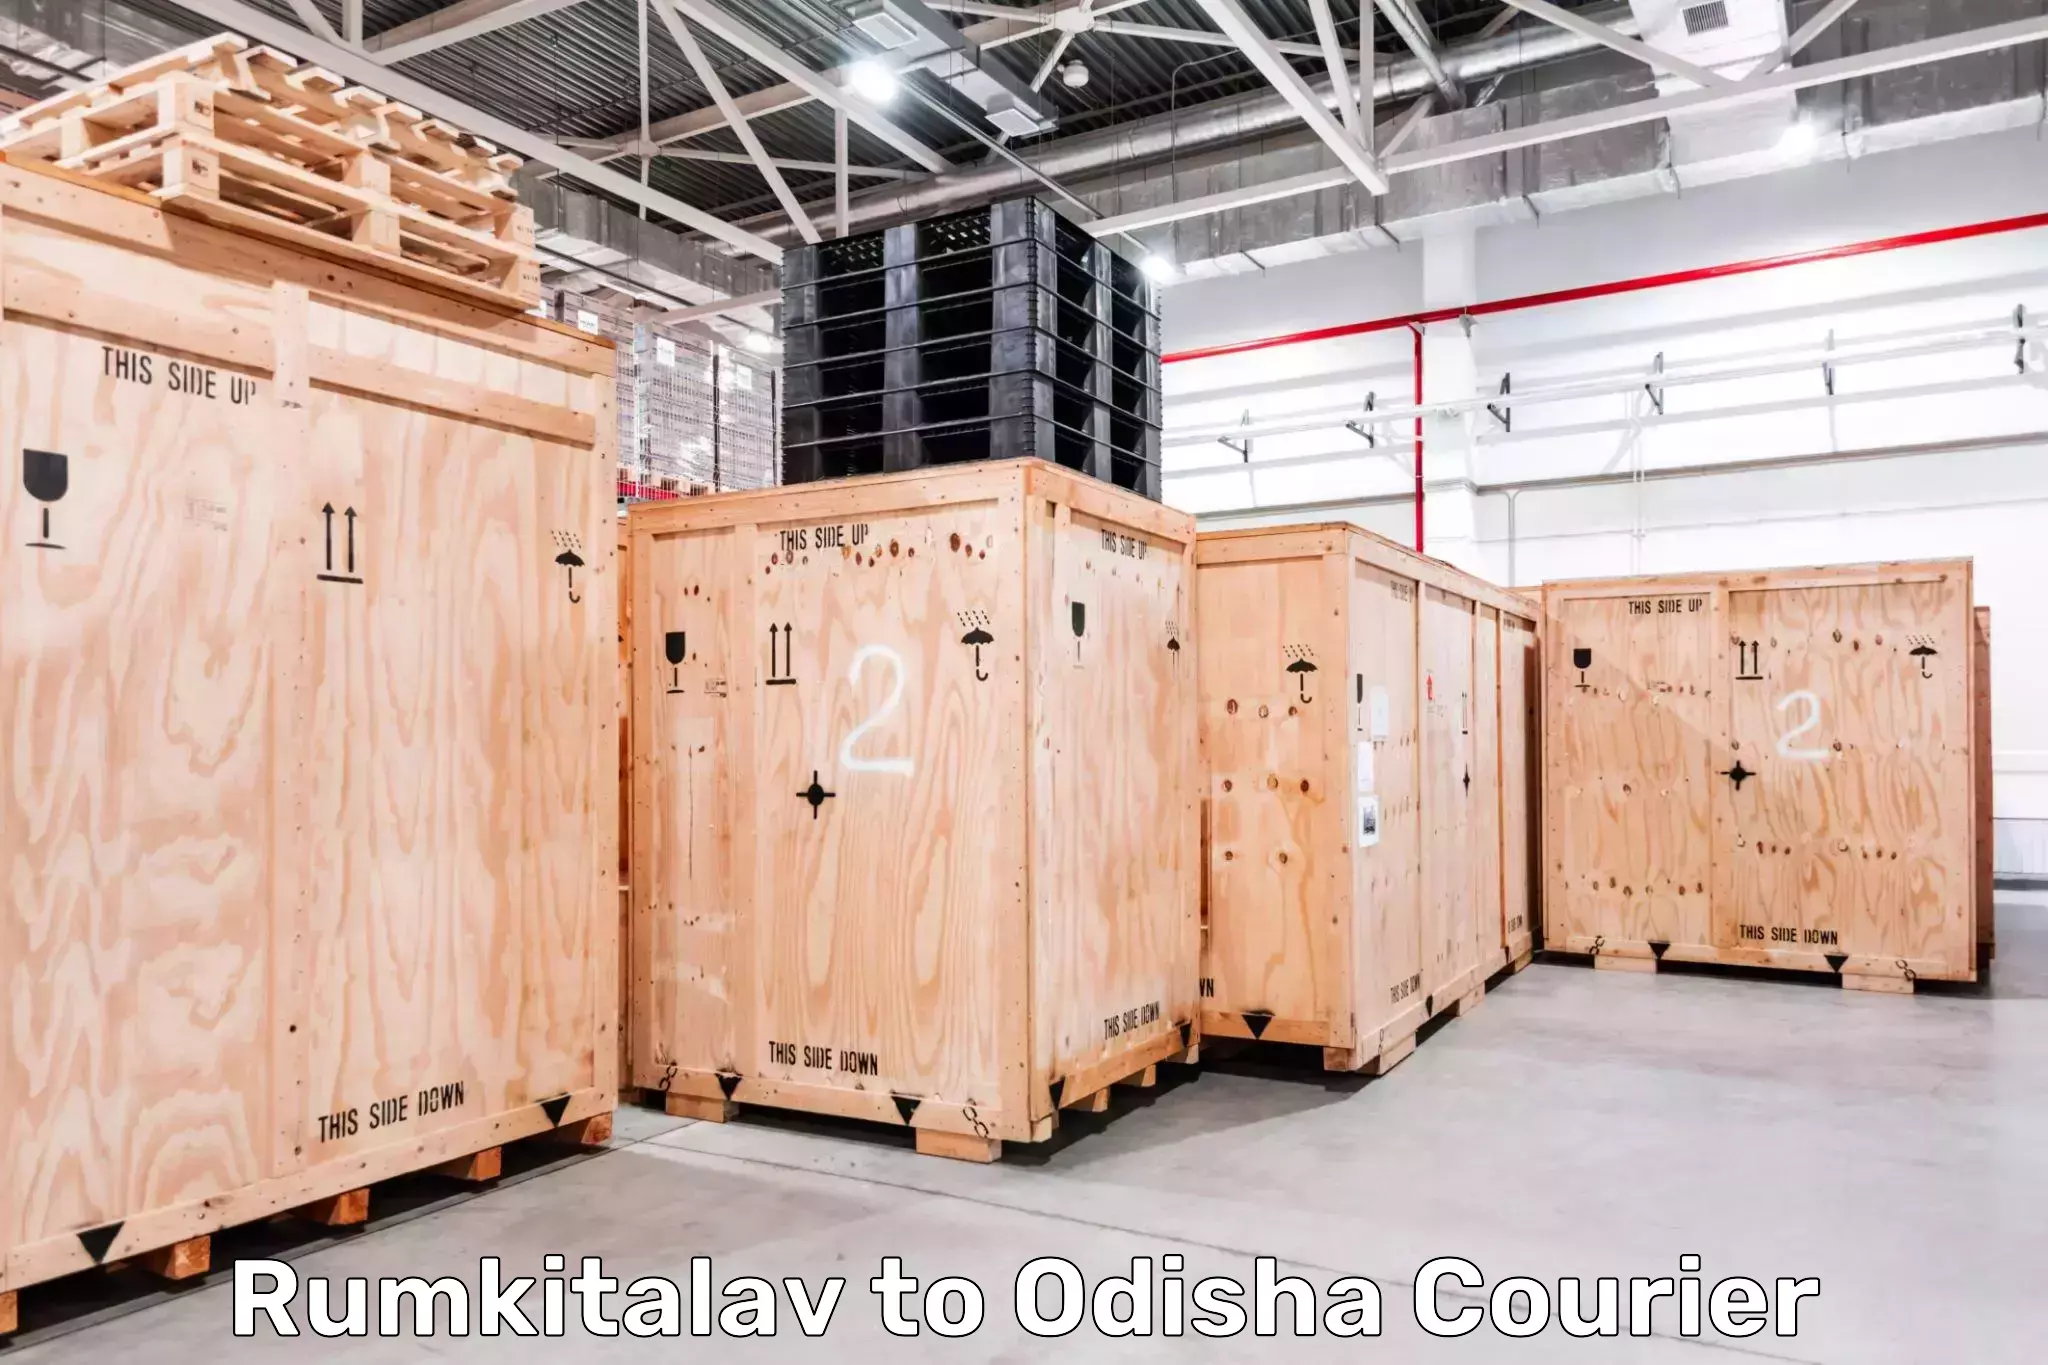 Global freight services Rumkitalav to Asika